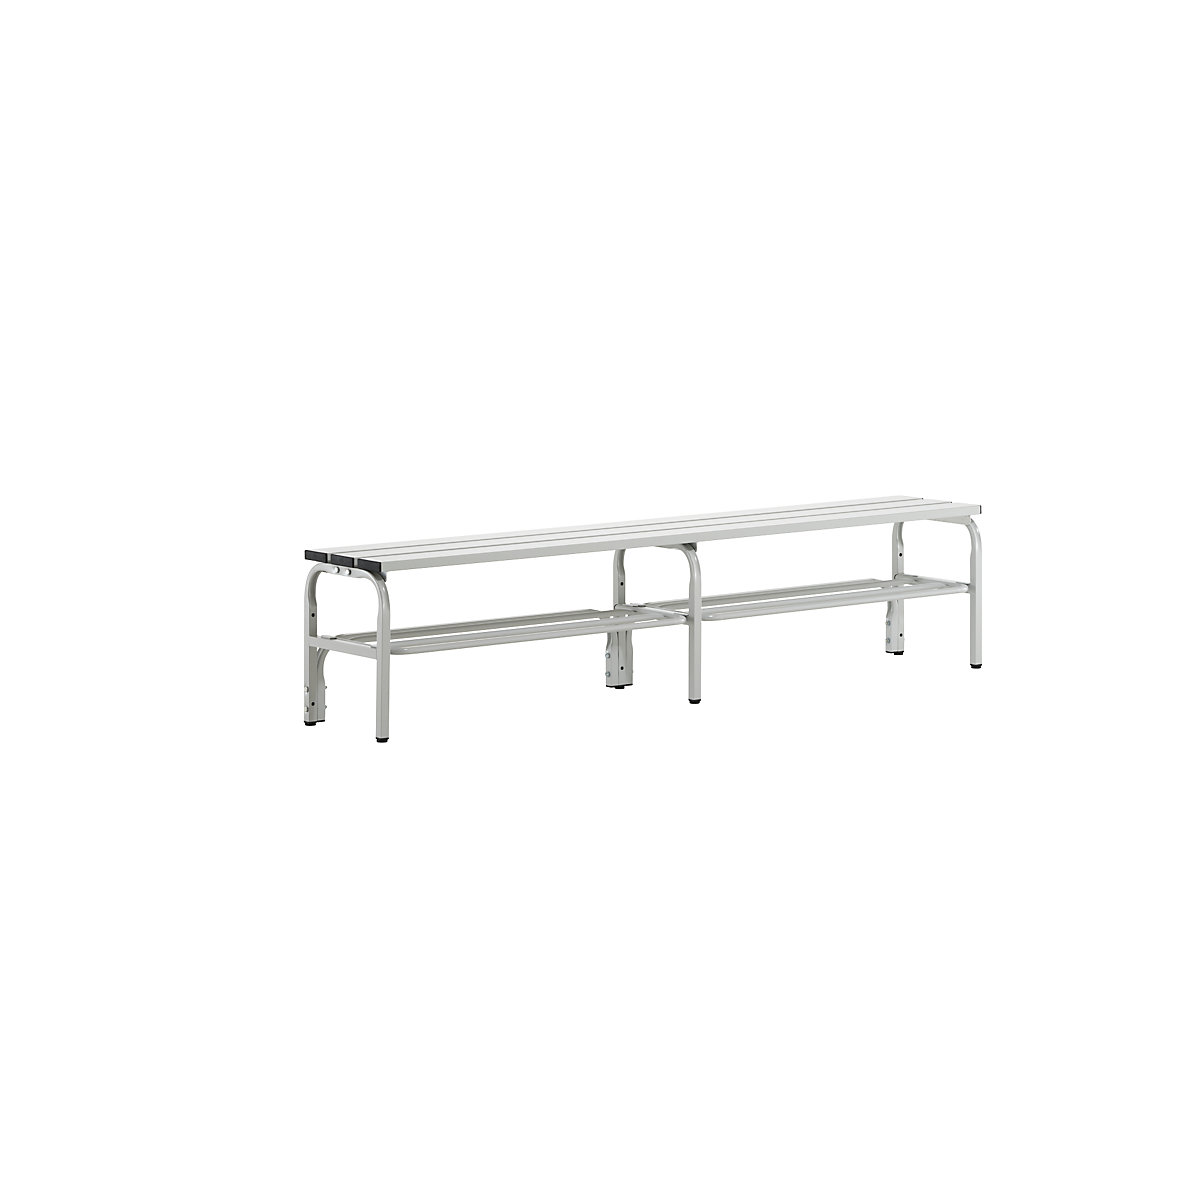 Sypro – Changing room bench made of stainless steel, HxD 450 x 350 mm, length 1500 mm, light grey, shoe rack